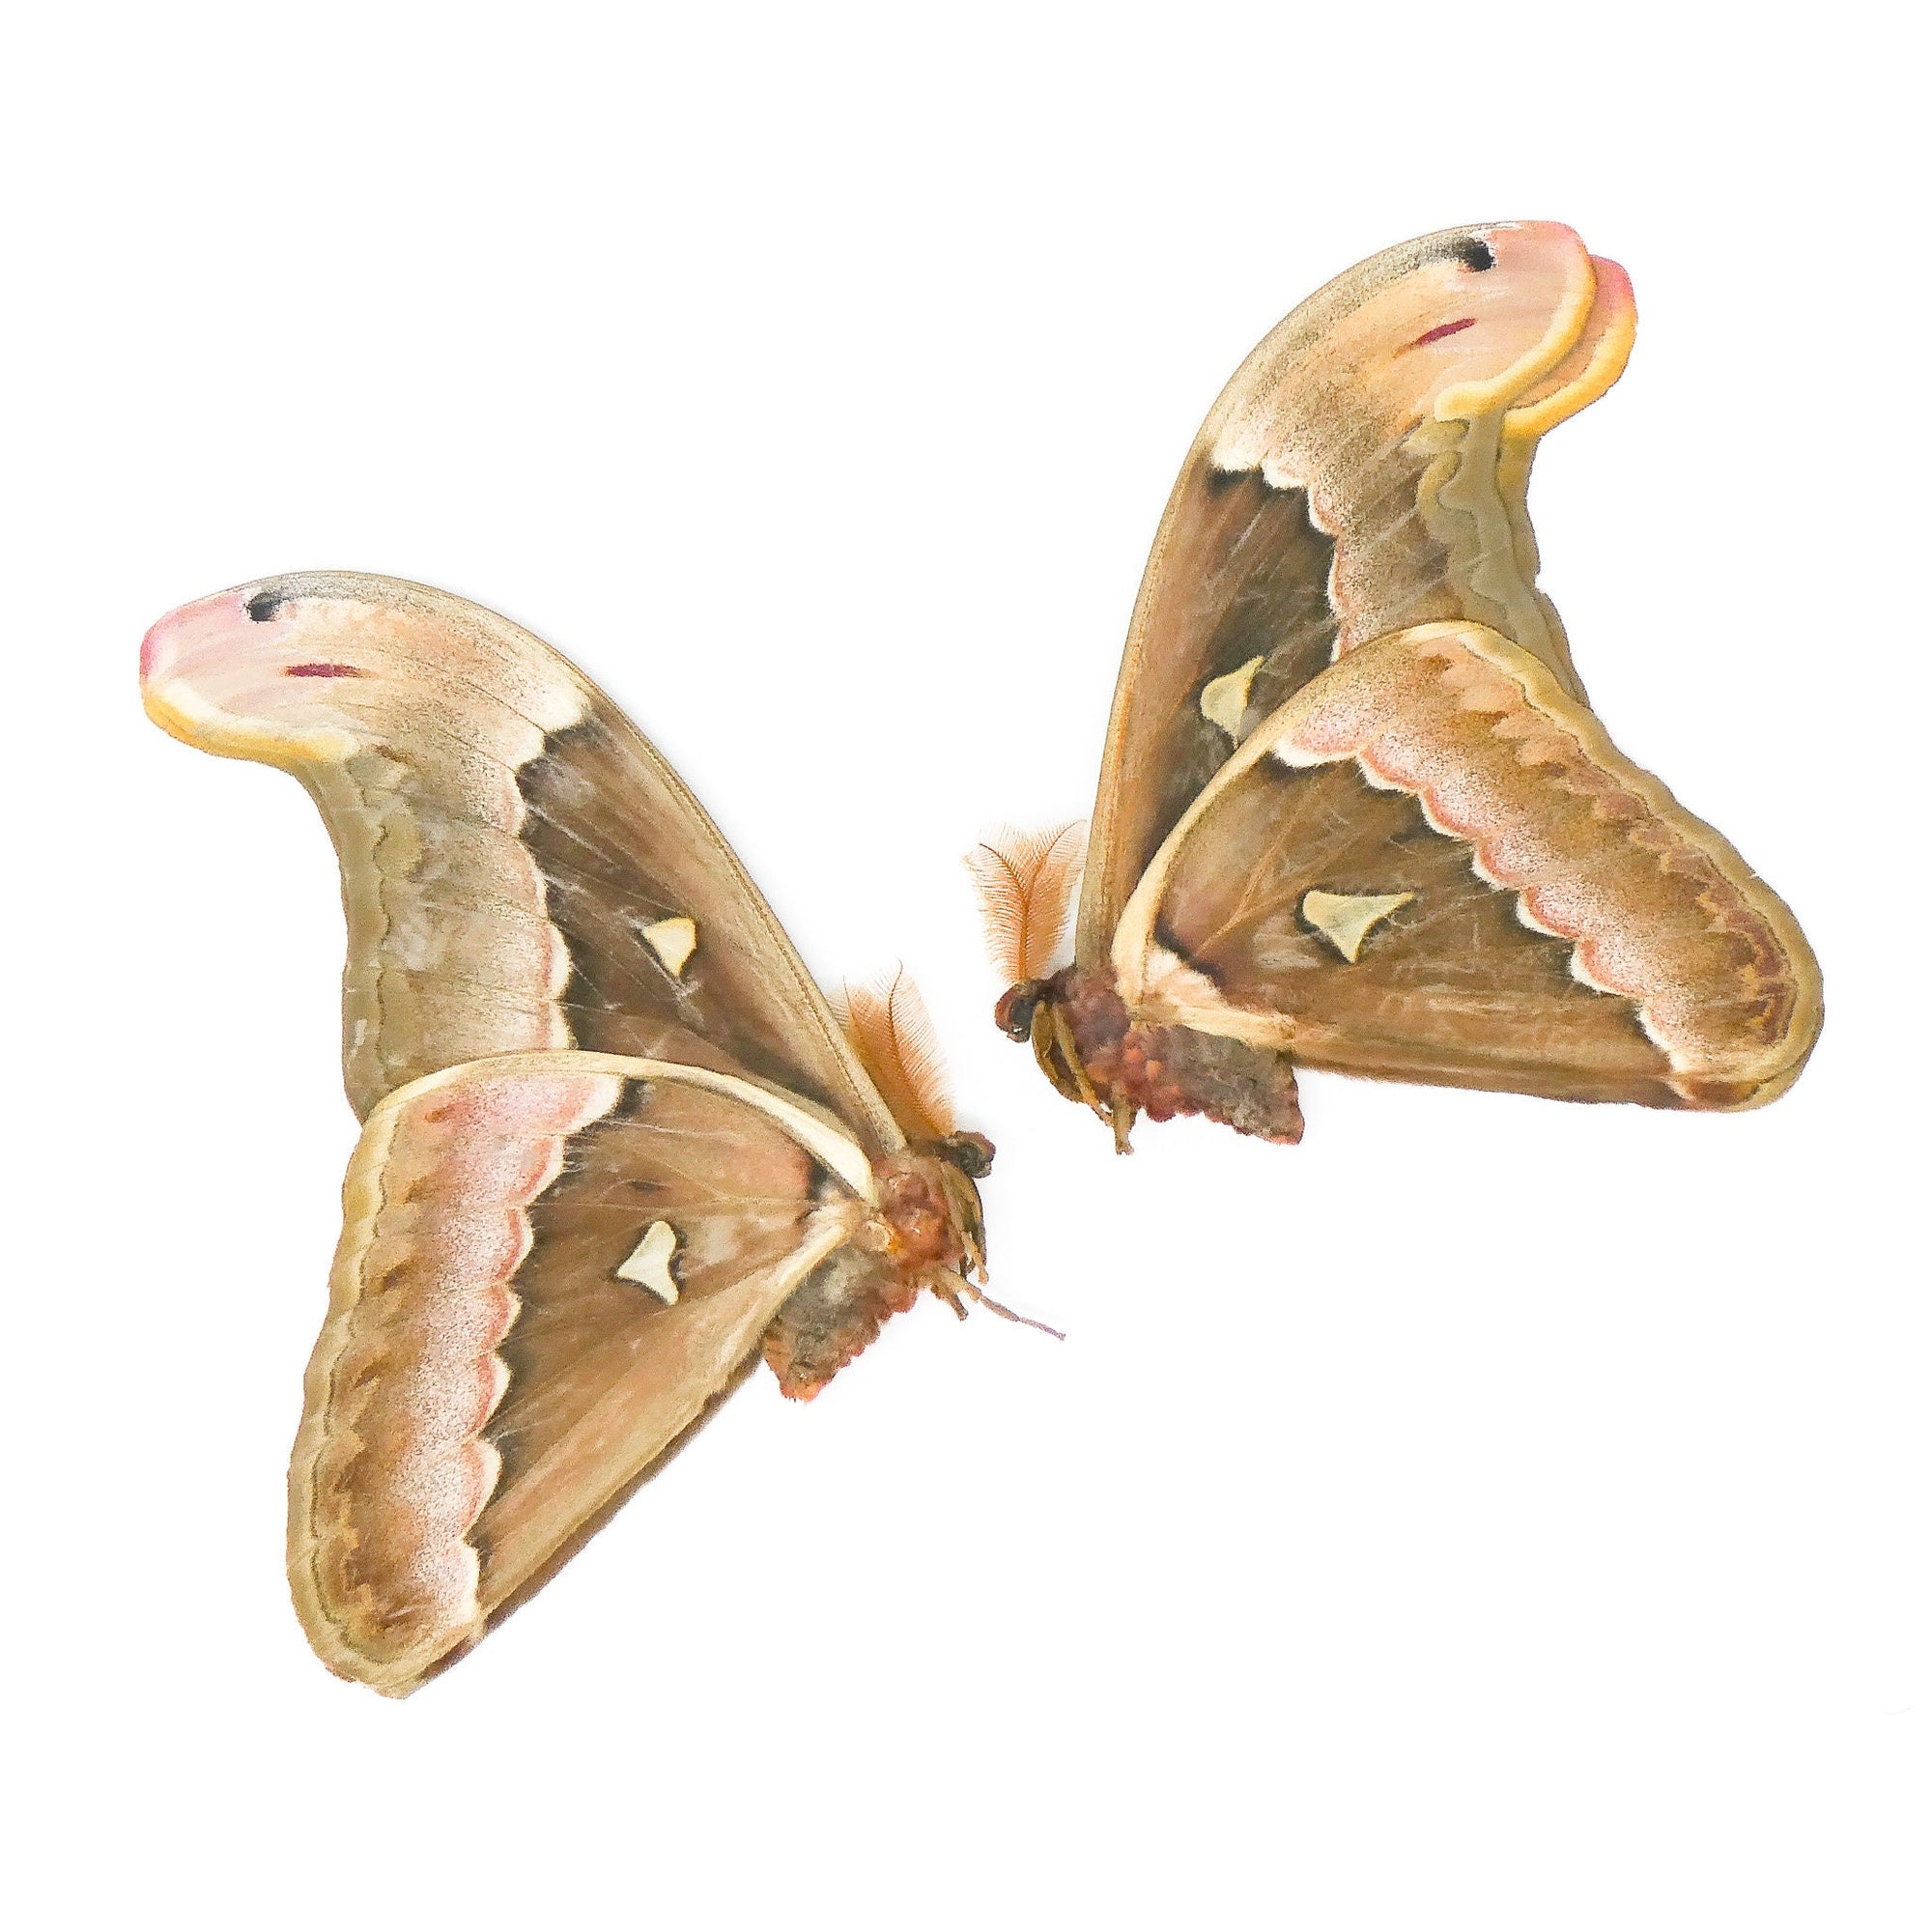 TWO (2) Attacus soebaensis | A1- Real Dry-Preserved Butterflies | Unmounted Entomology Taxidermy Specimens